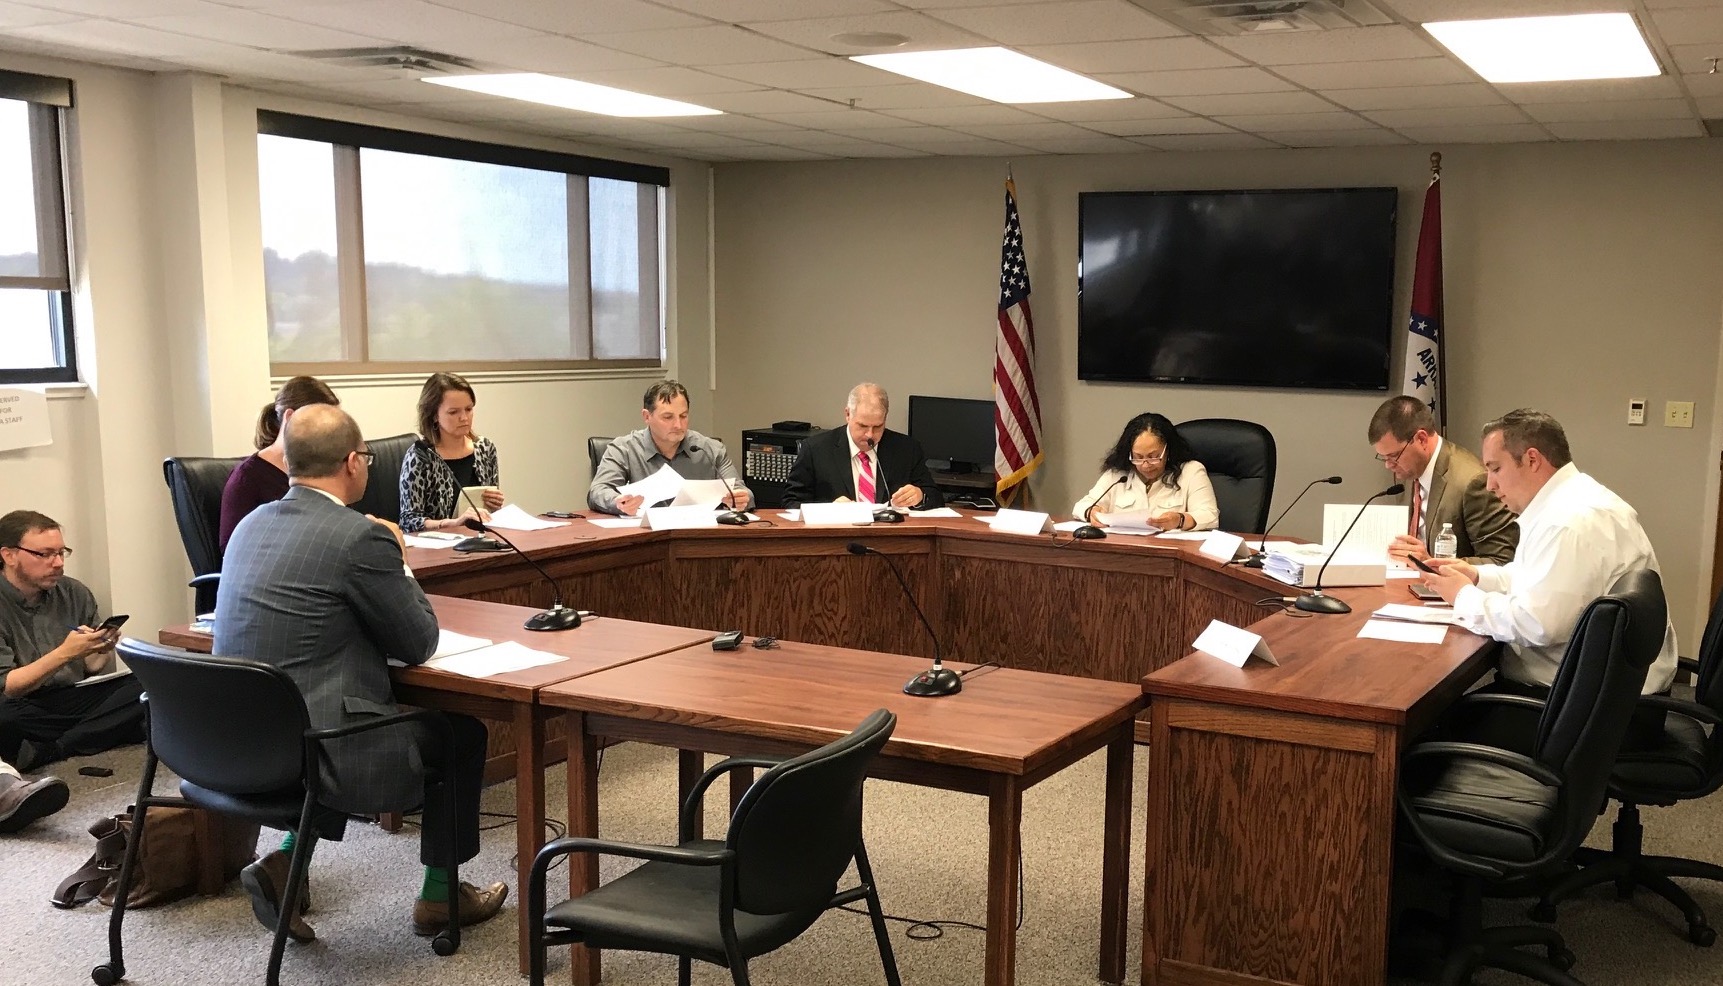 Updates from the June 6th Medical Marijuana Commission Meeting